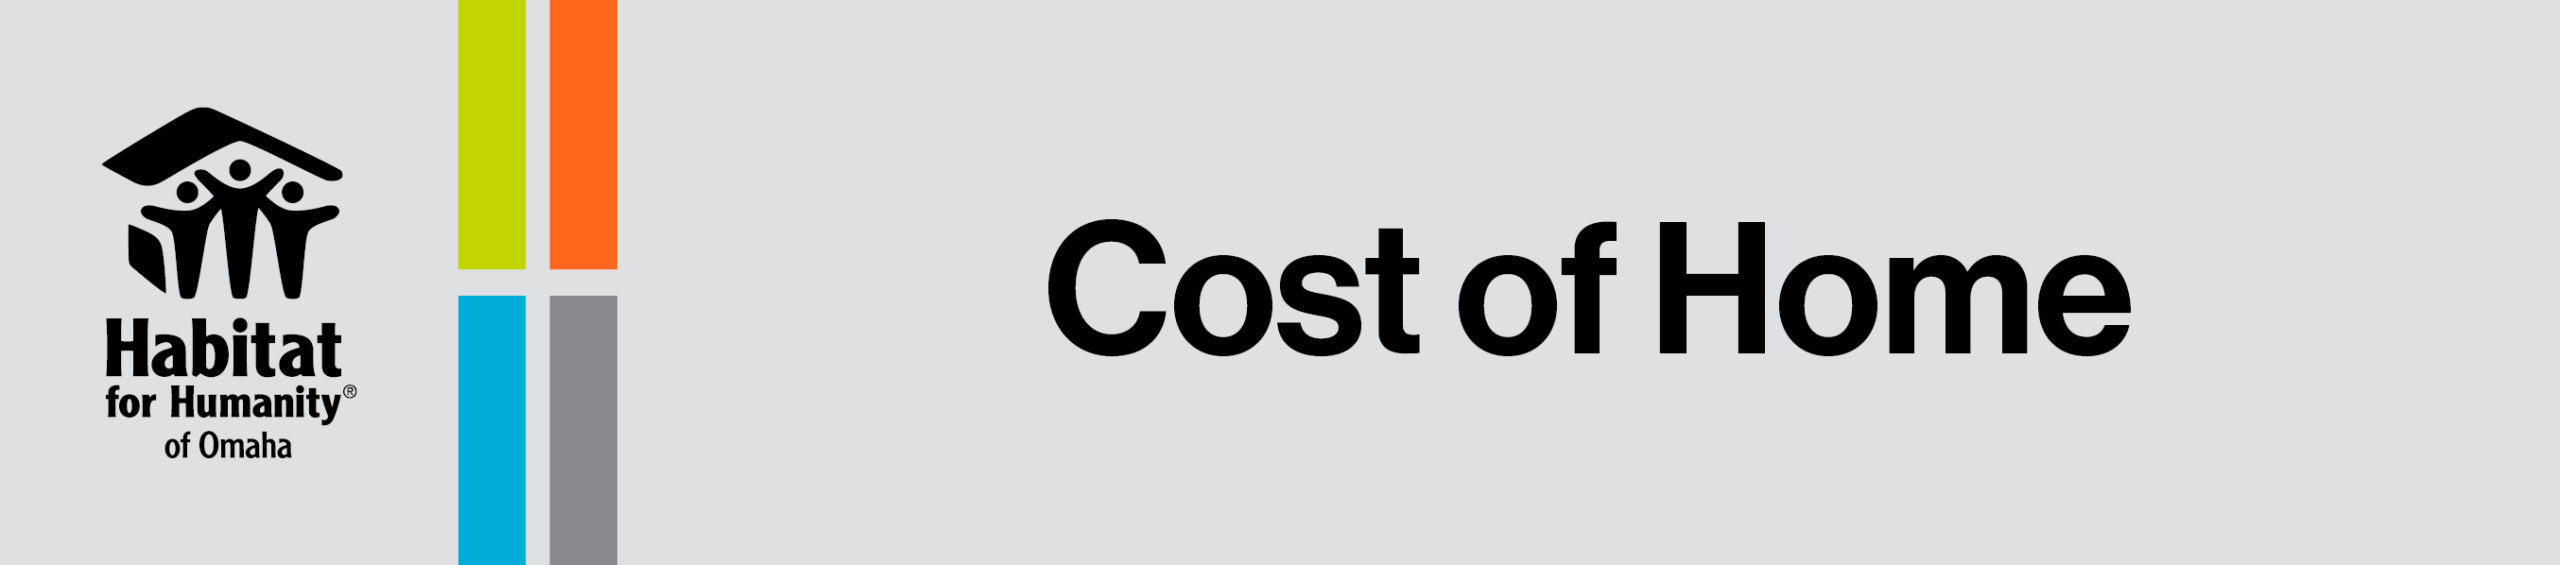 Cost of Home